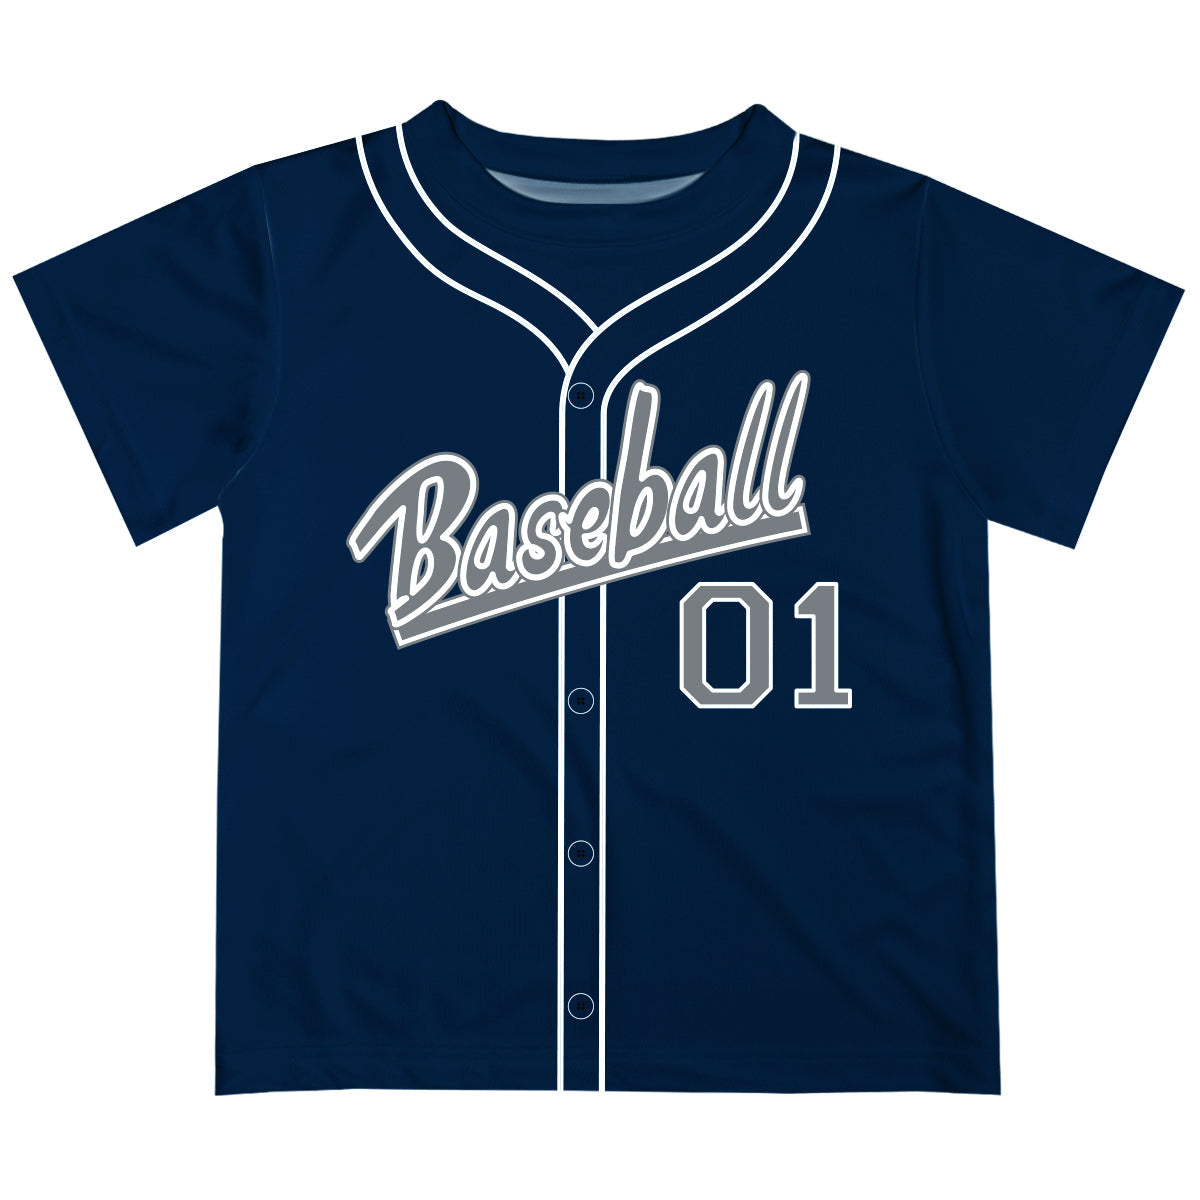 Baseball Personalized Name and Number Navy Short Sleeve Tee Shirt